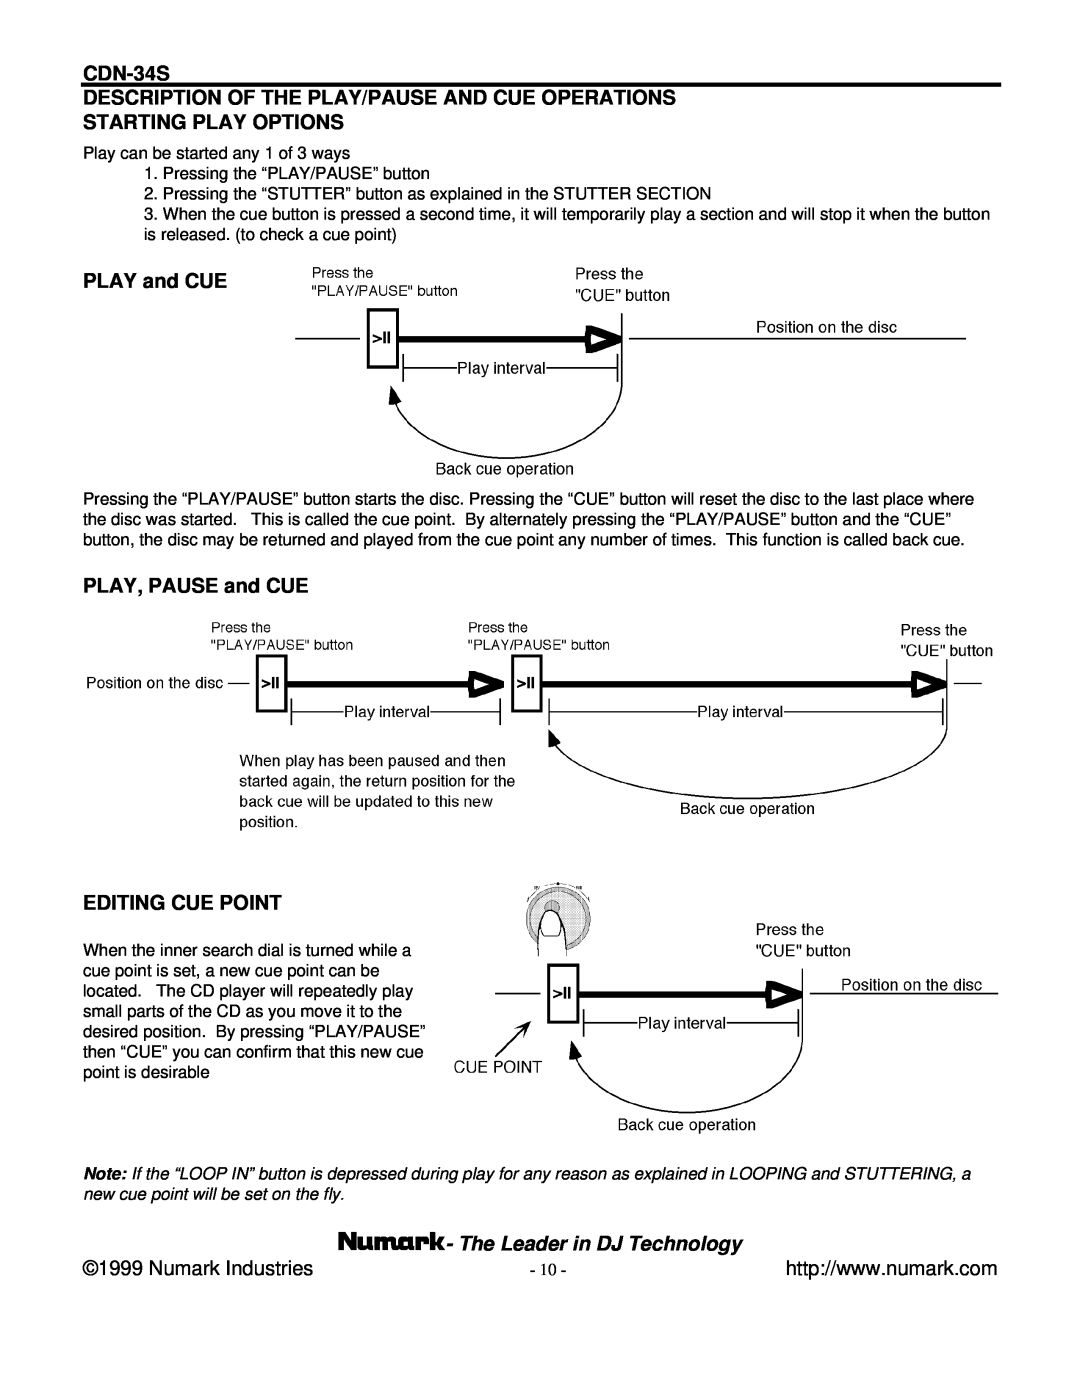 Numark Industries CDN-34S manual Description Of The Play/Pause And Cue Operations, Starting Play Options, PLAY and CUE 